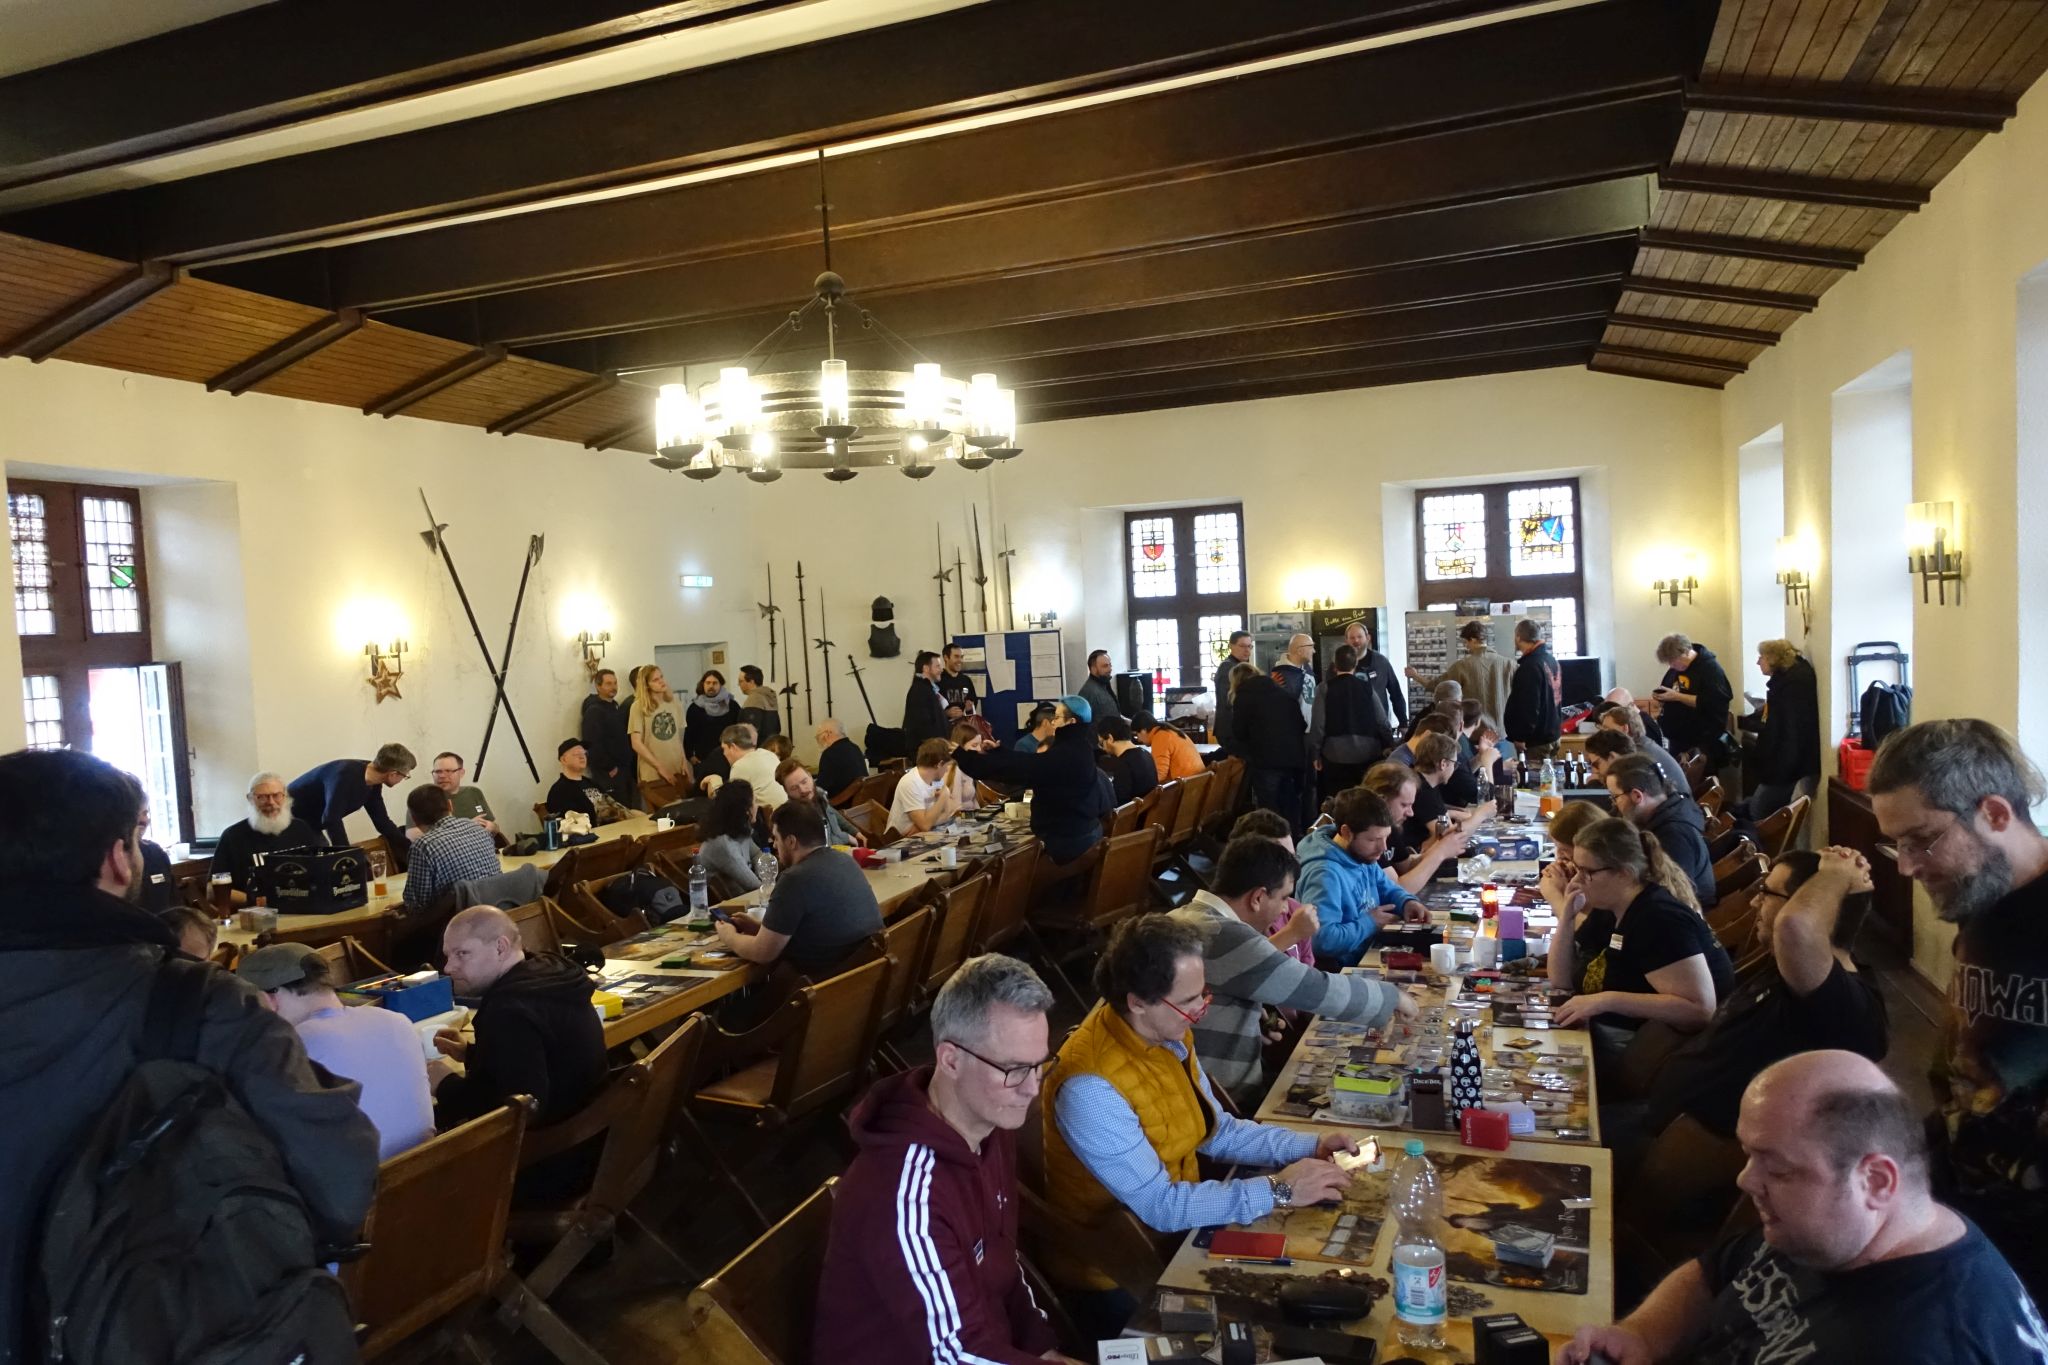 A hall full of long tables. There are games on the tables and people play them.